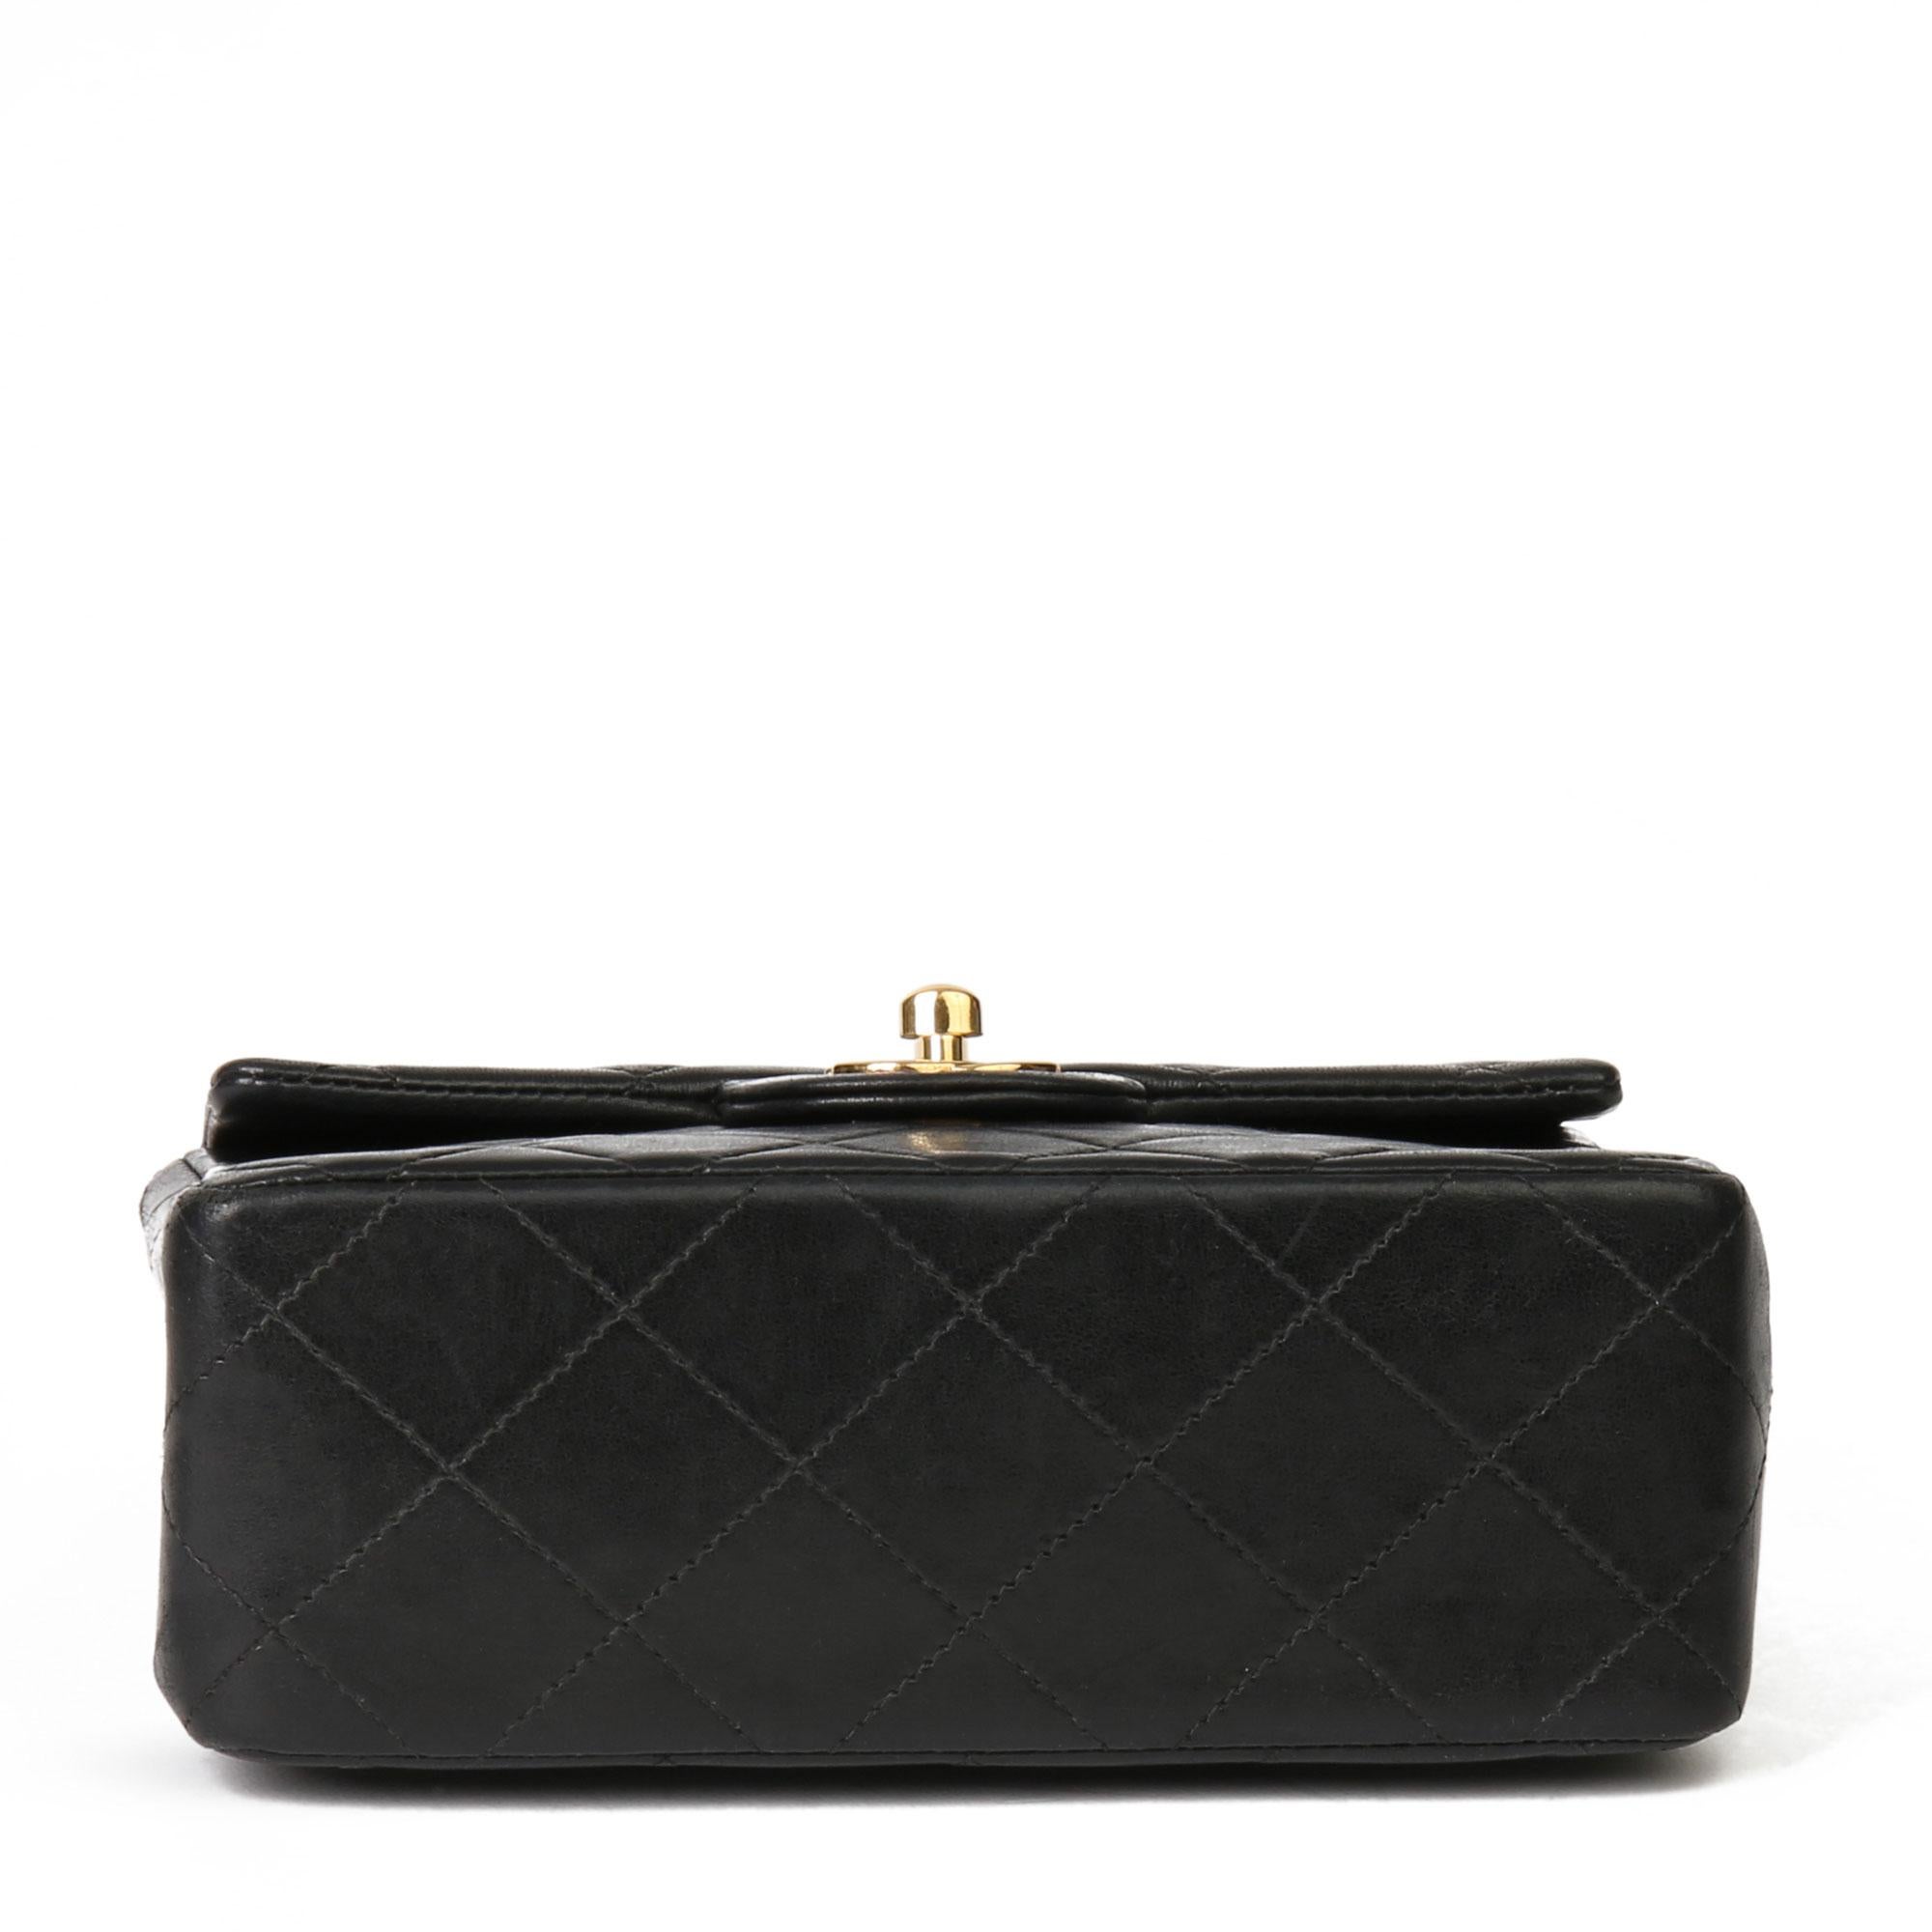 2003 Chanel Black Quilted Lambskin Mini Flap Bag  2